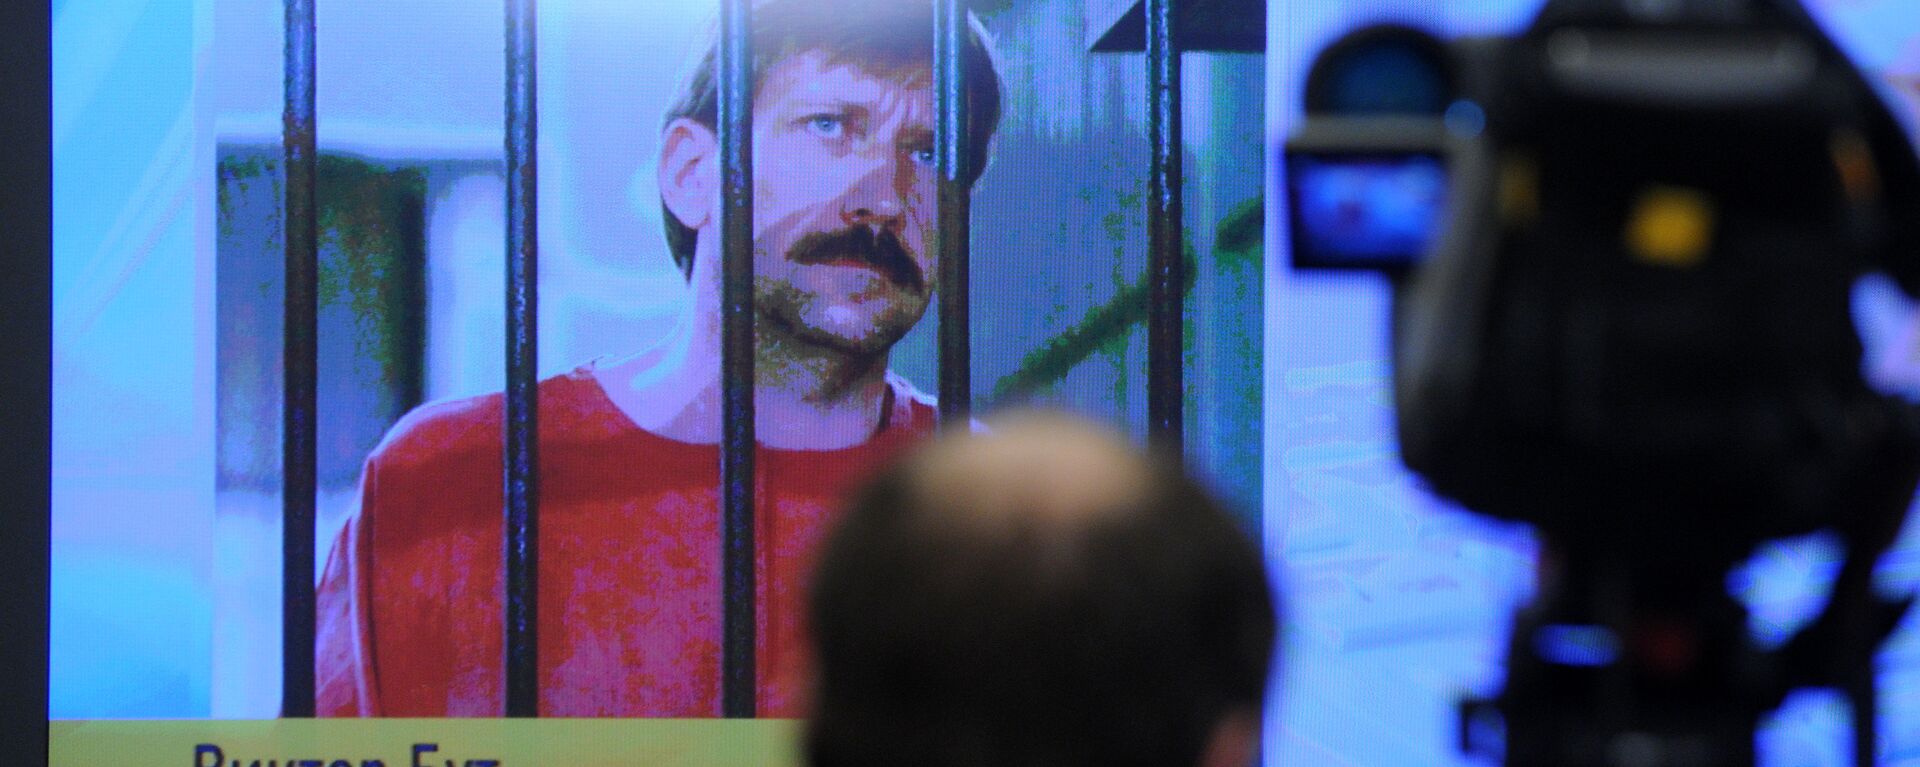 A journalist stands near a screen displaying convicted Russian arms smuggler Viktor Bout in Moscow, on 12 April 2012, during a teleconference with Bout from his US prison - Sputnik International, 1920, 26.10.2020